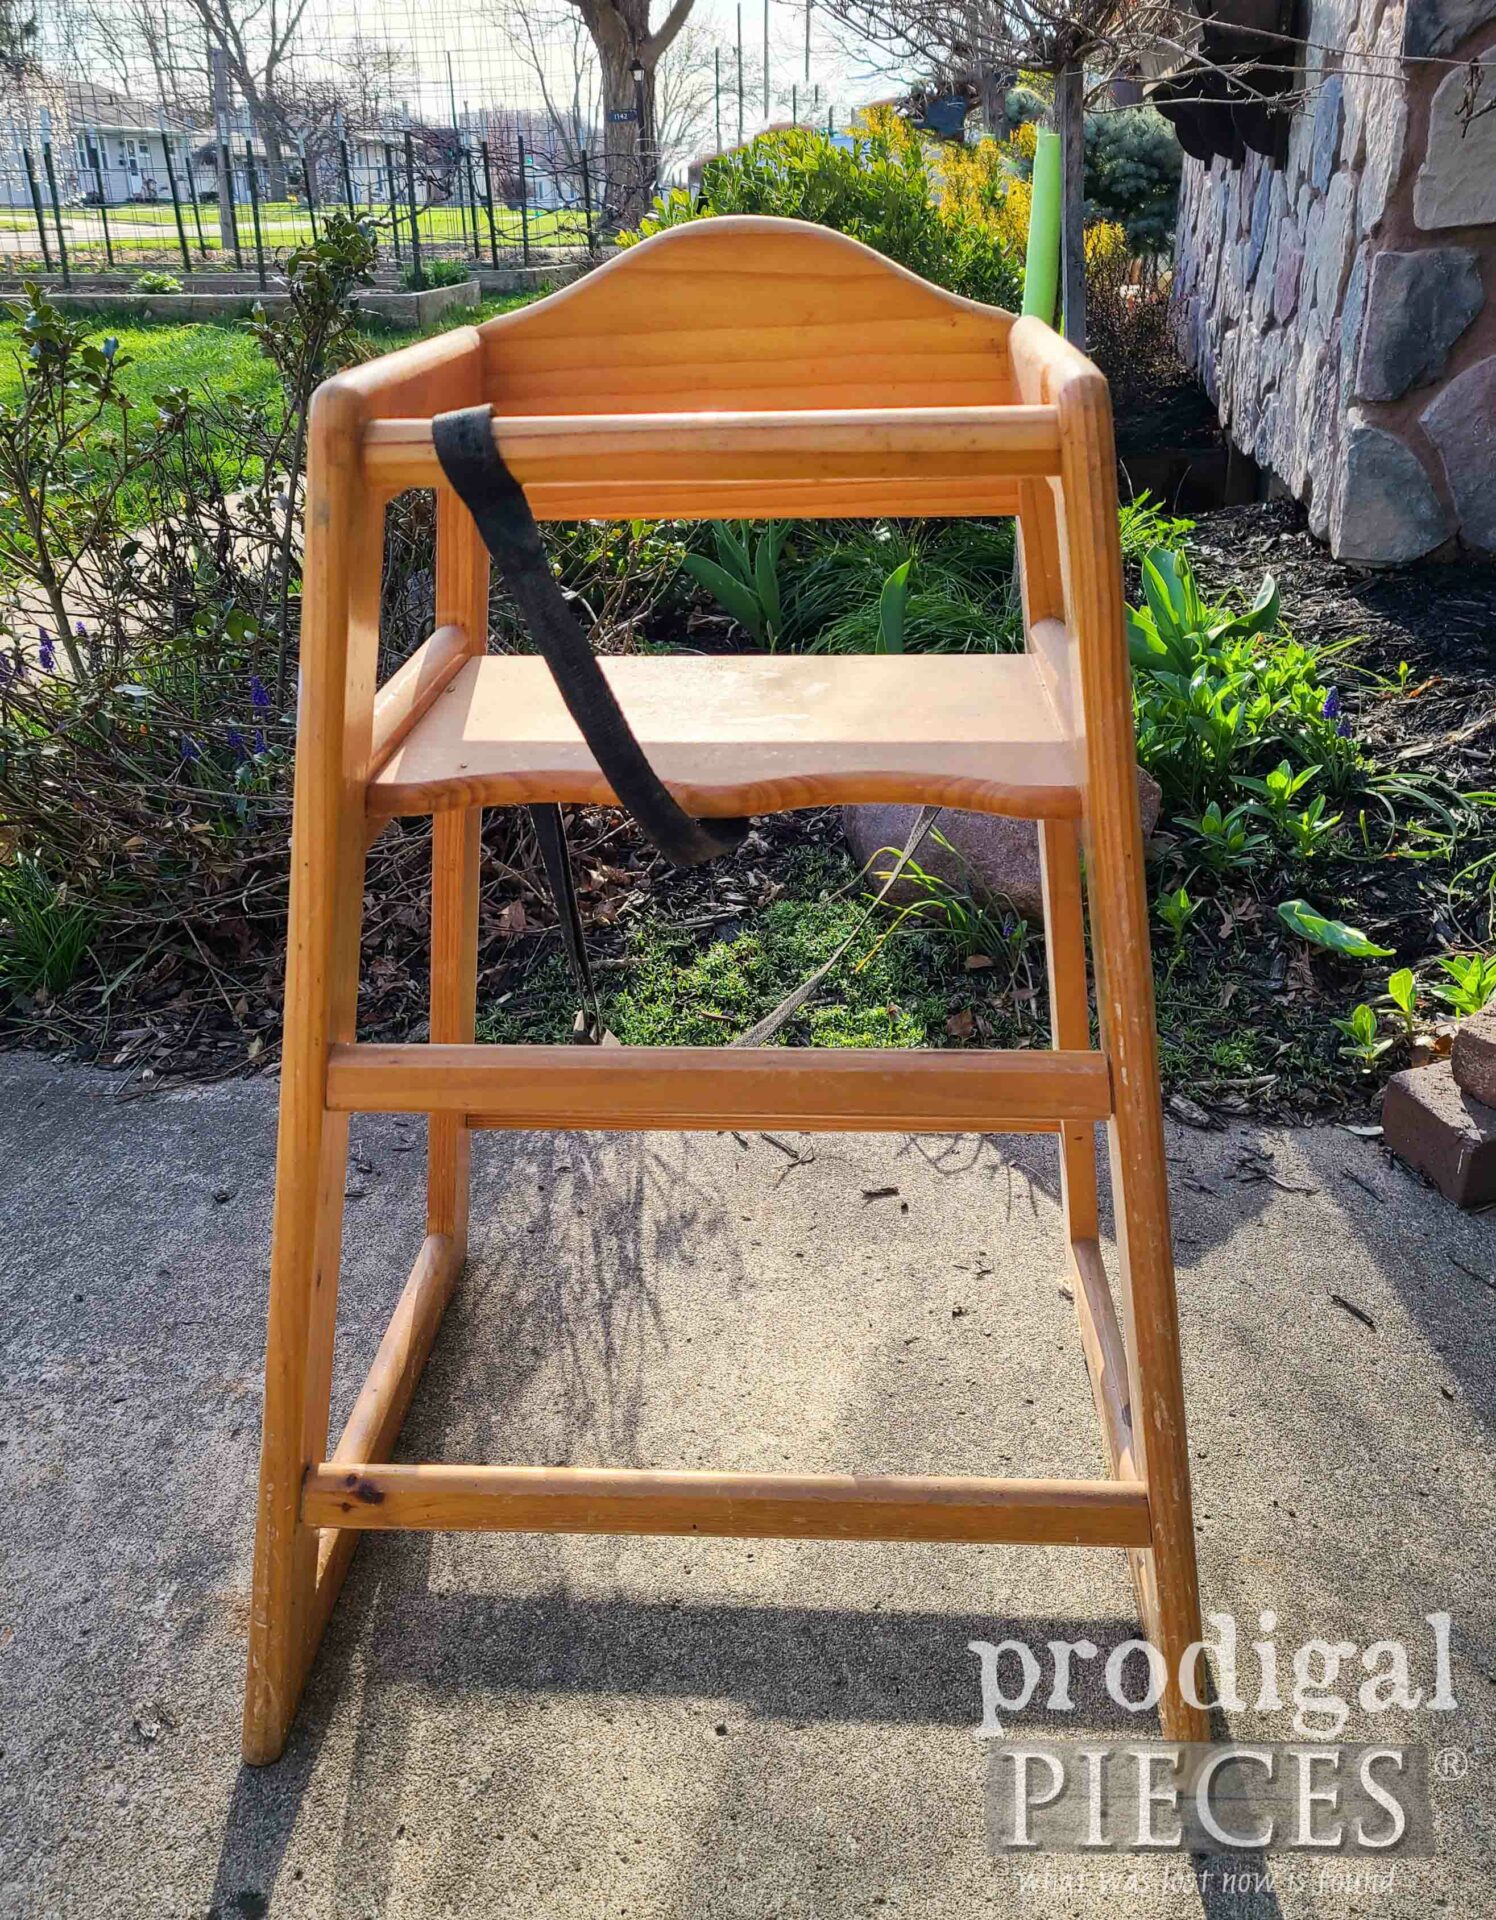 Solid Wood Highchair Before DIY Painted Highchair Makeover Tutorial | prodigalpieces.com #prodigalpieces